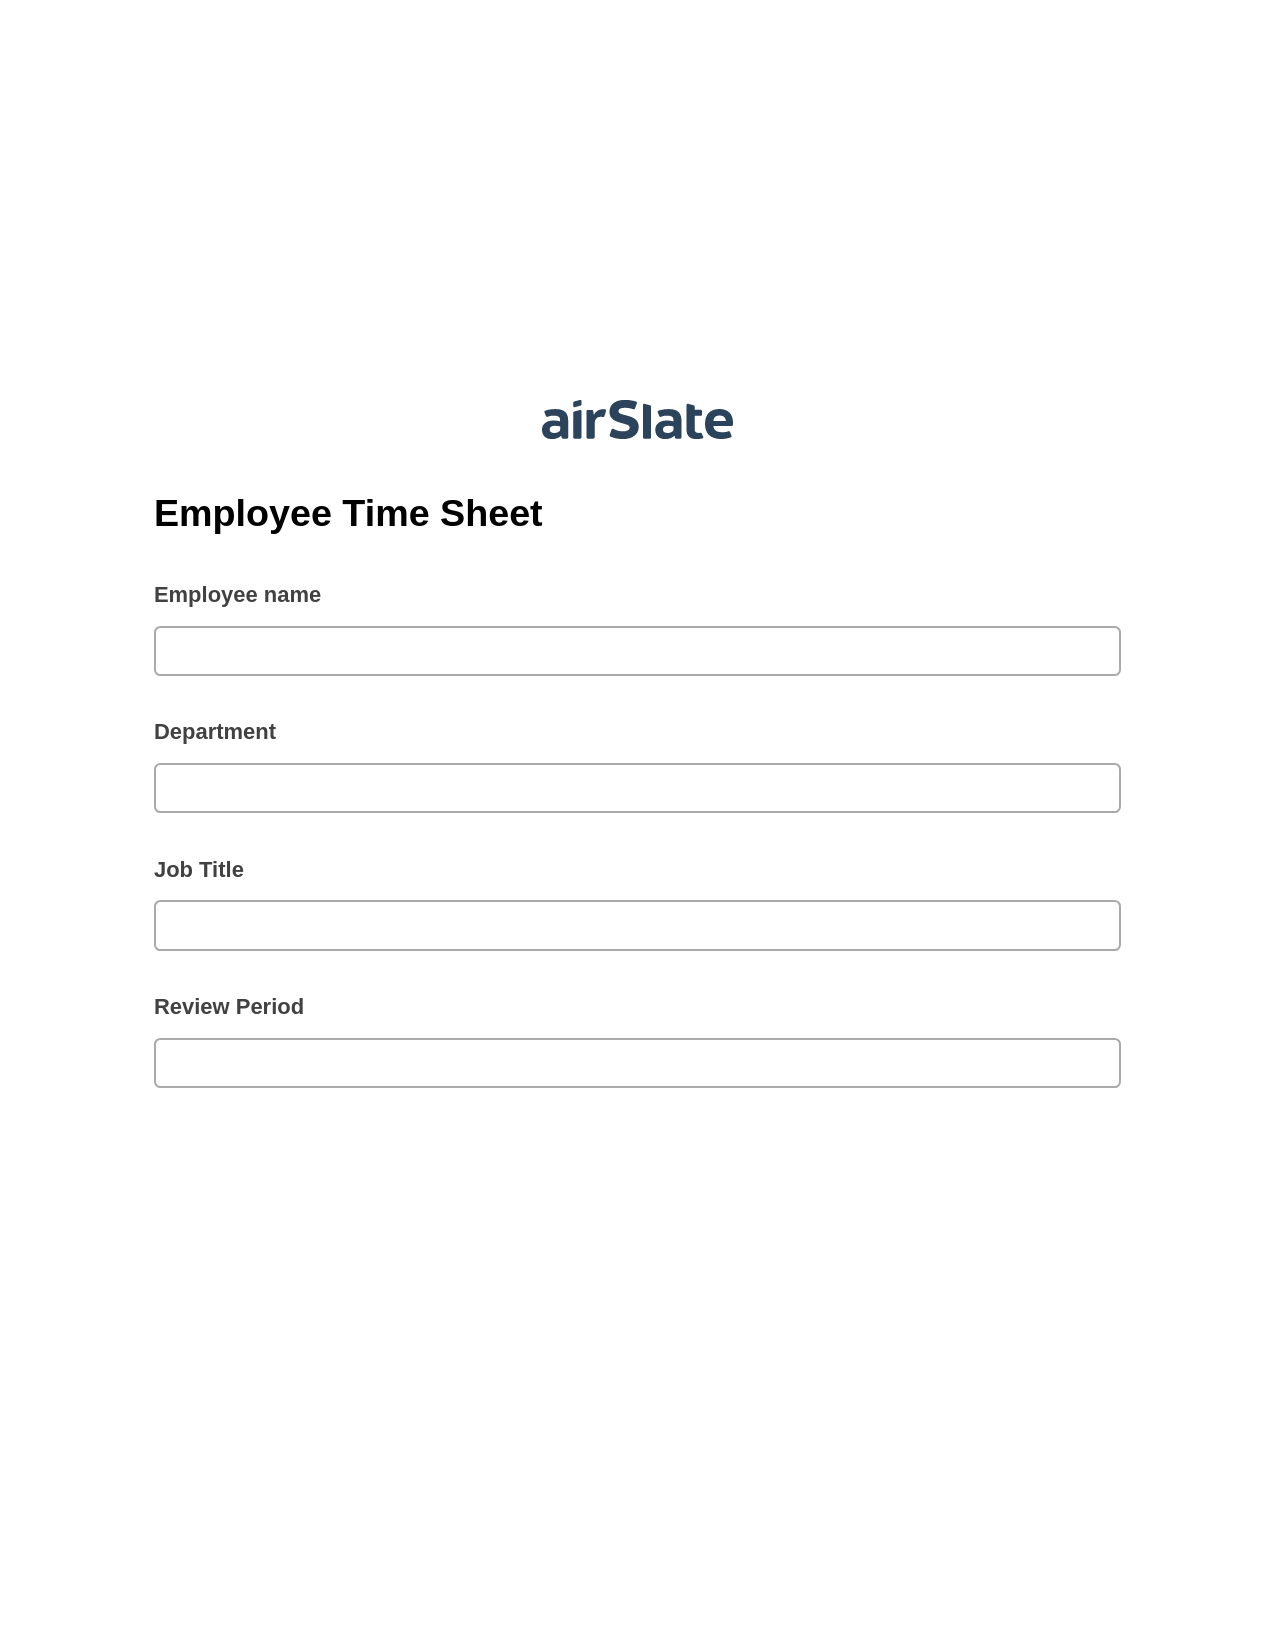 Multirole Employee Time Sheet Pre-fill from CSV File Bot, Update Audit Trail Bot, Export to NetSuite Bot